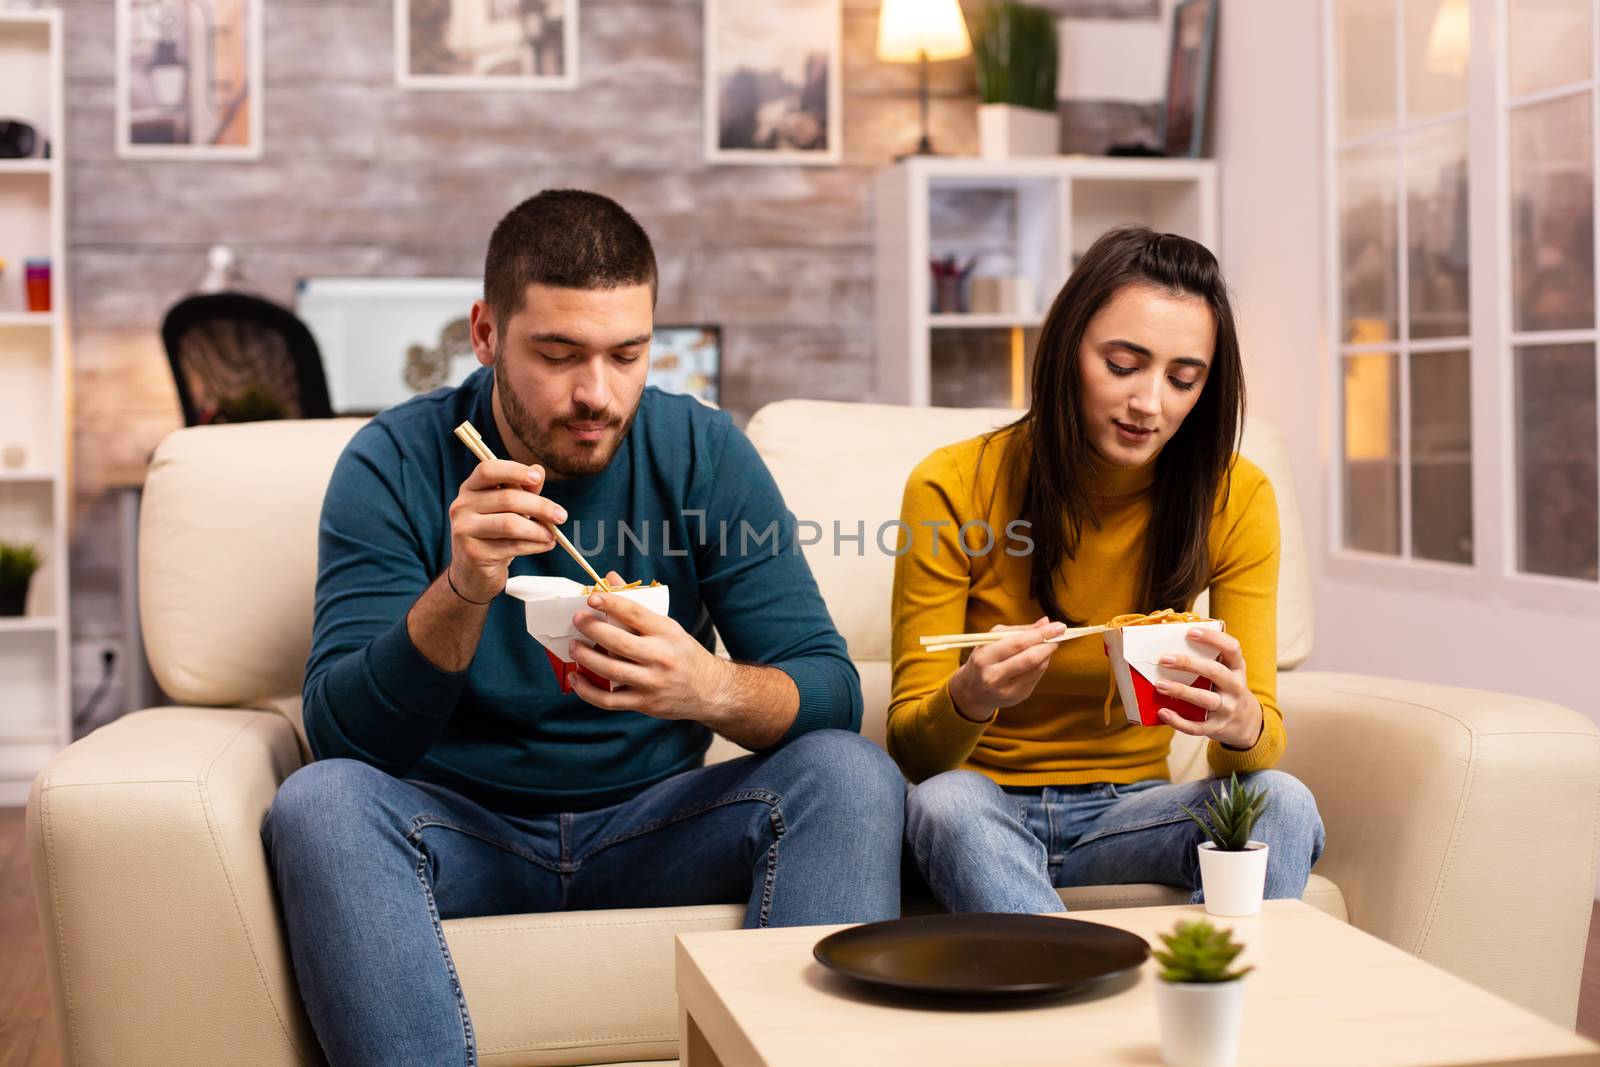 In modern cozy living room couple is enjoying takeaway noodles while watching TV comfortably on the sofa